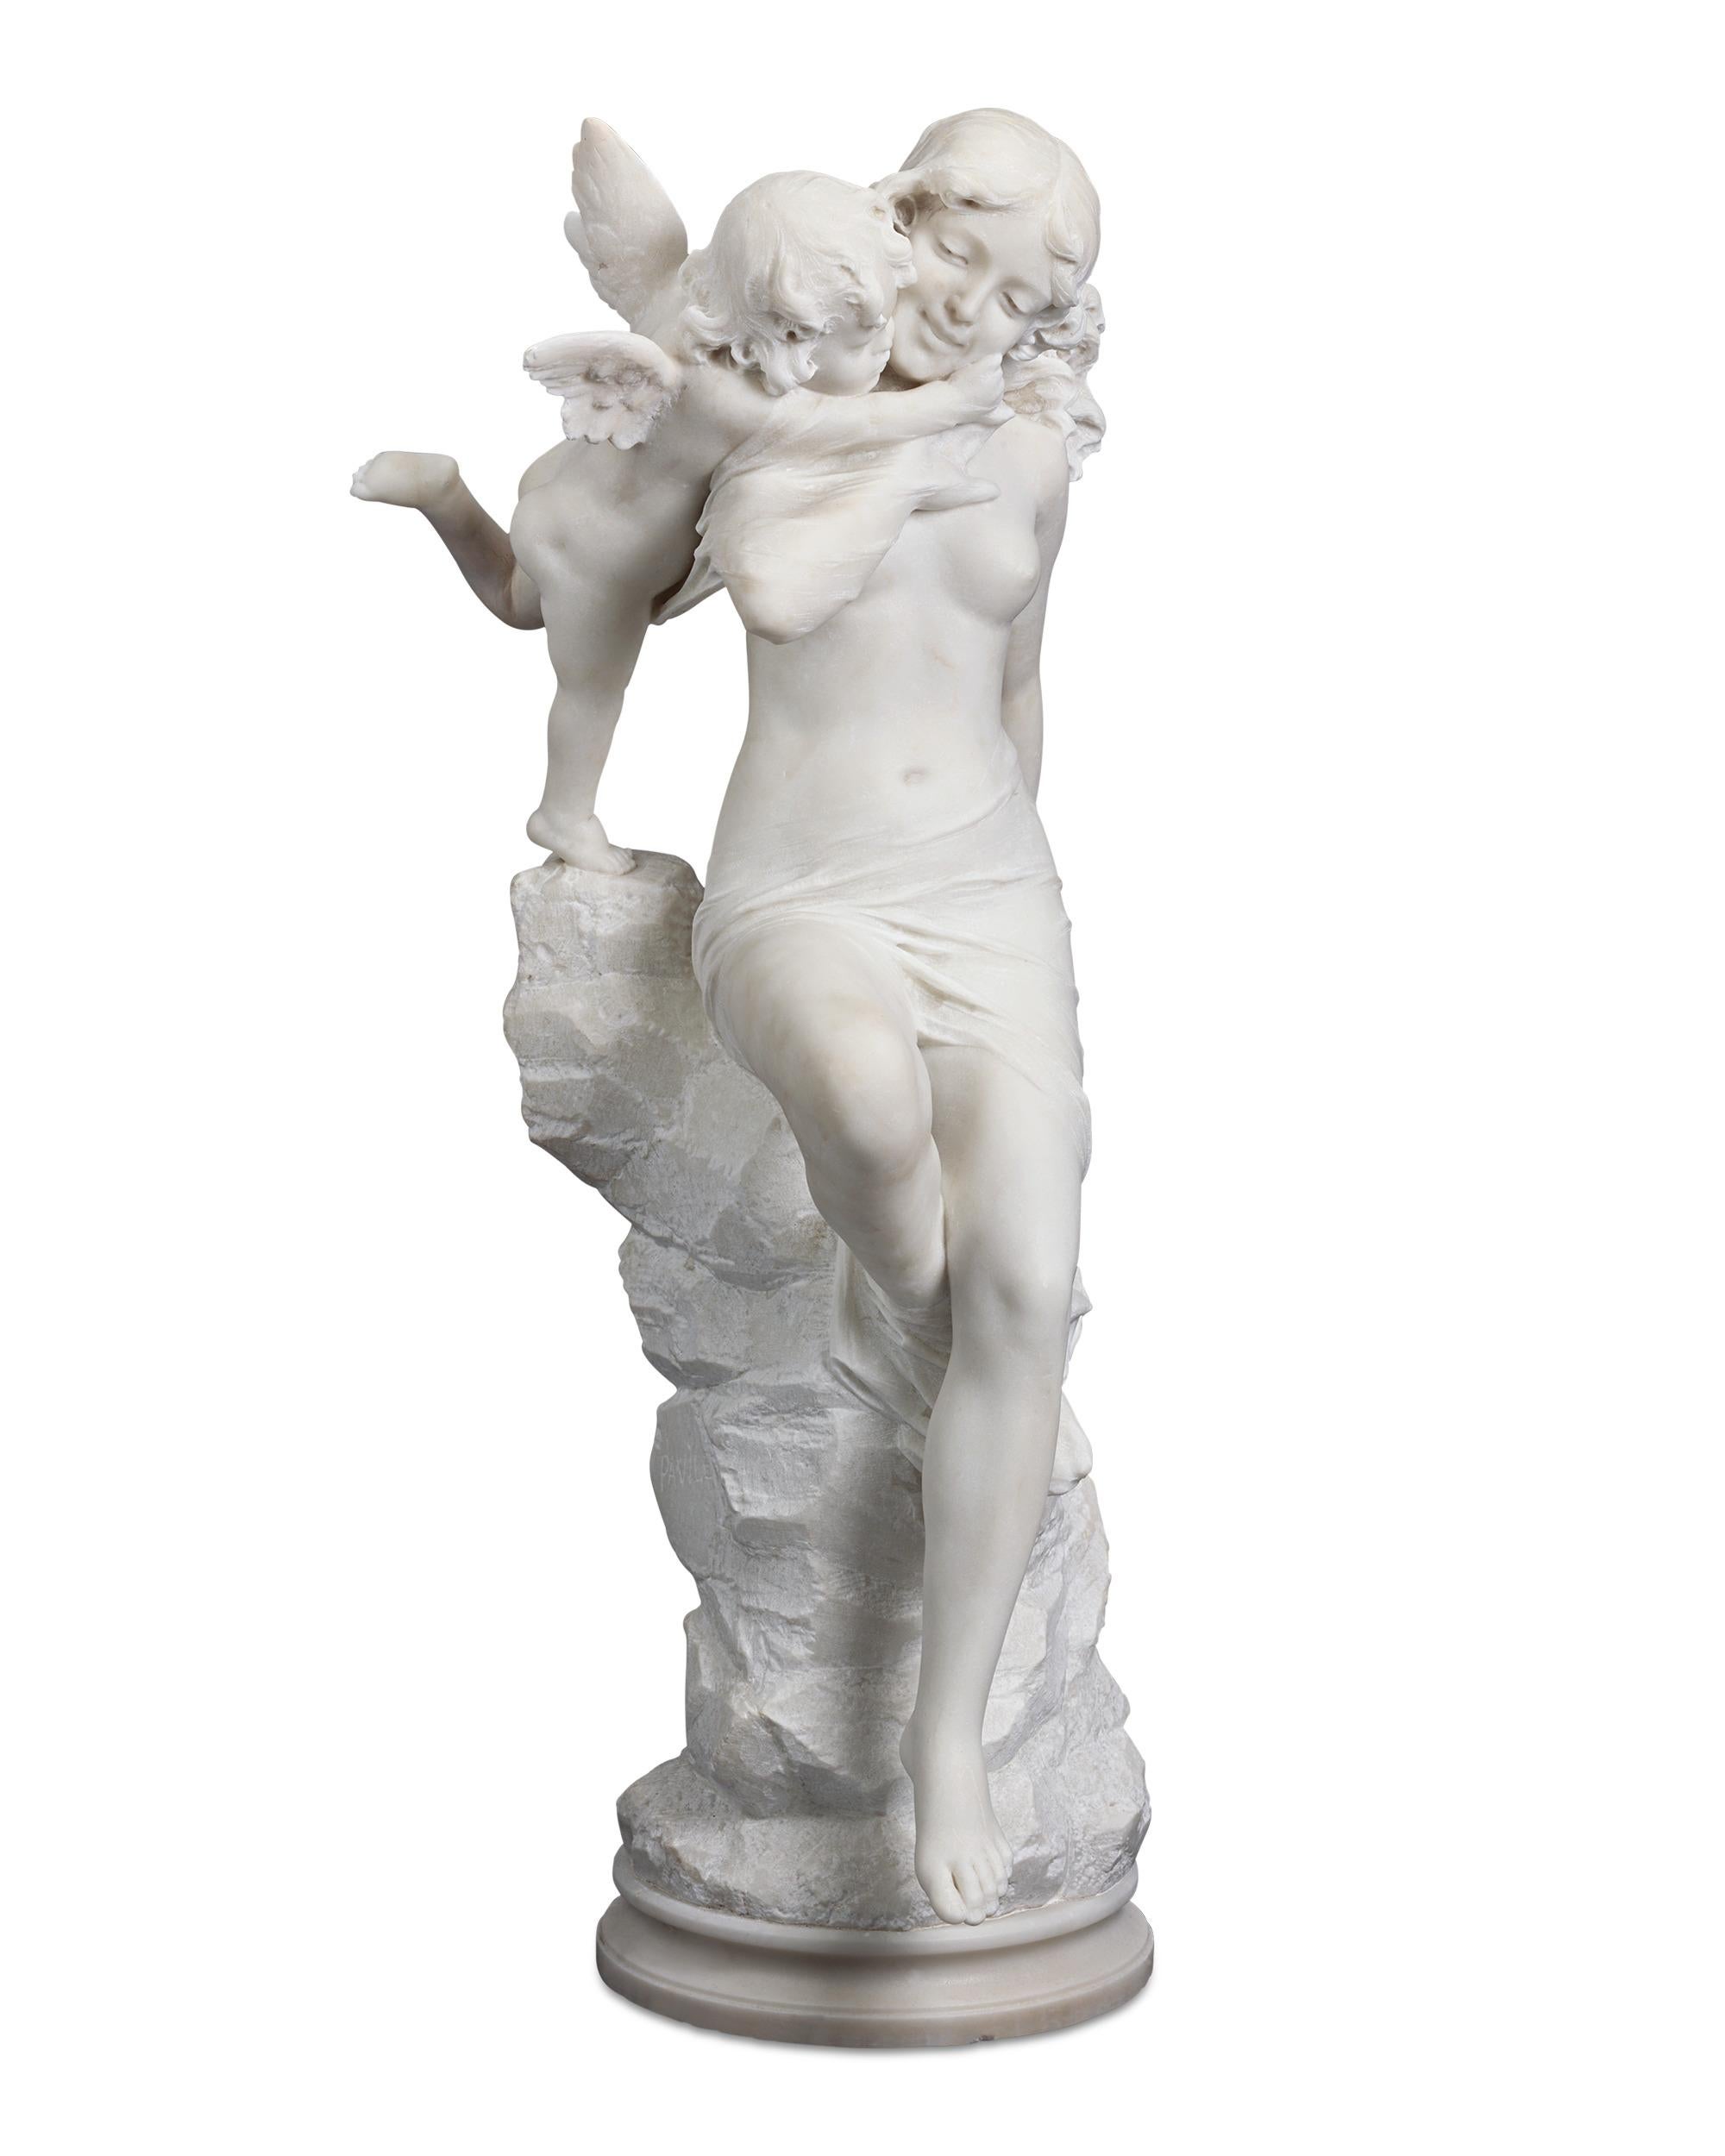 Beautifully detailed and lifelike, Venus and Cupid share a soft embrace in this remarkable Italian white marble sculpture. The feminine beauty gracefully leans against roughened rockery that masterfully contrasts the supple smoothness of the two